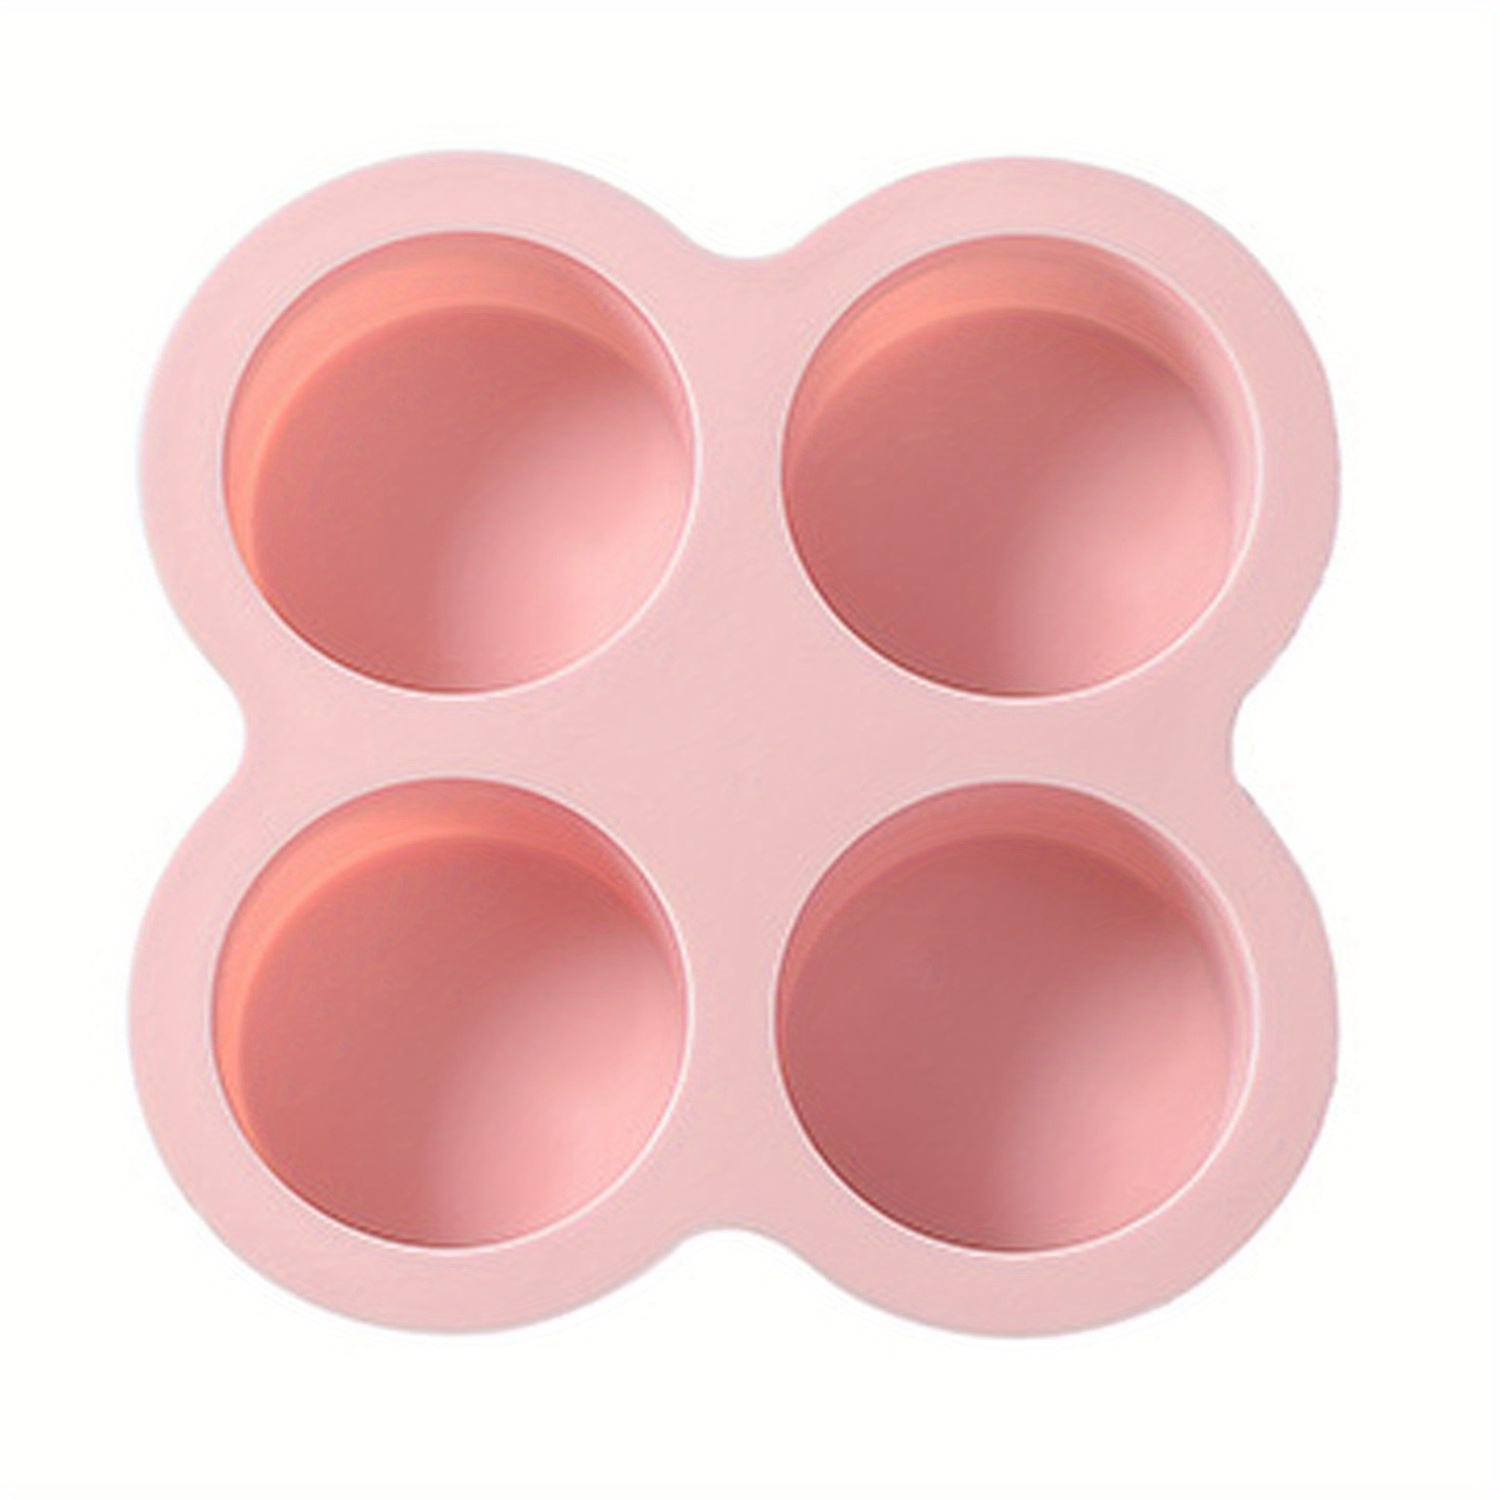 1pc Reusable Silicone Air Fryer Egg Mold, Non-Stick Air Fryer Baking Pan,  Silicone Muffin Pans For Baking, Hamburger Bun Pan, Air Fryer Accessories,  Kitchen Accessories